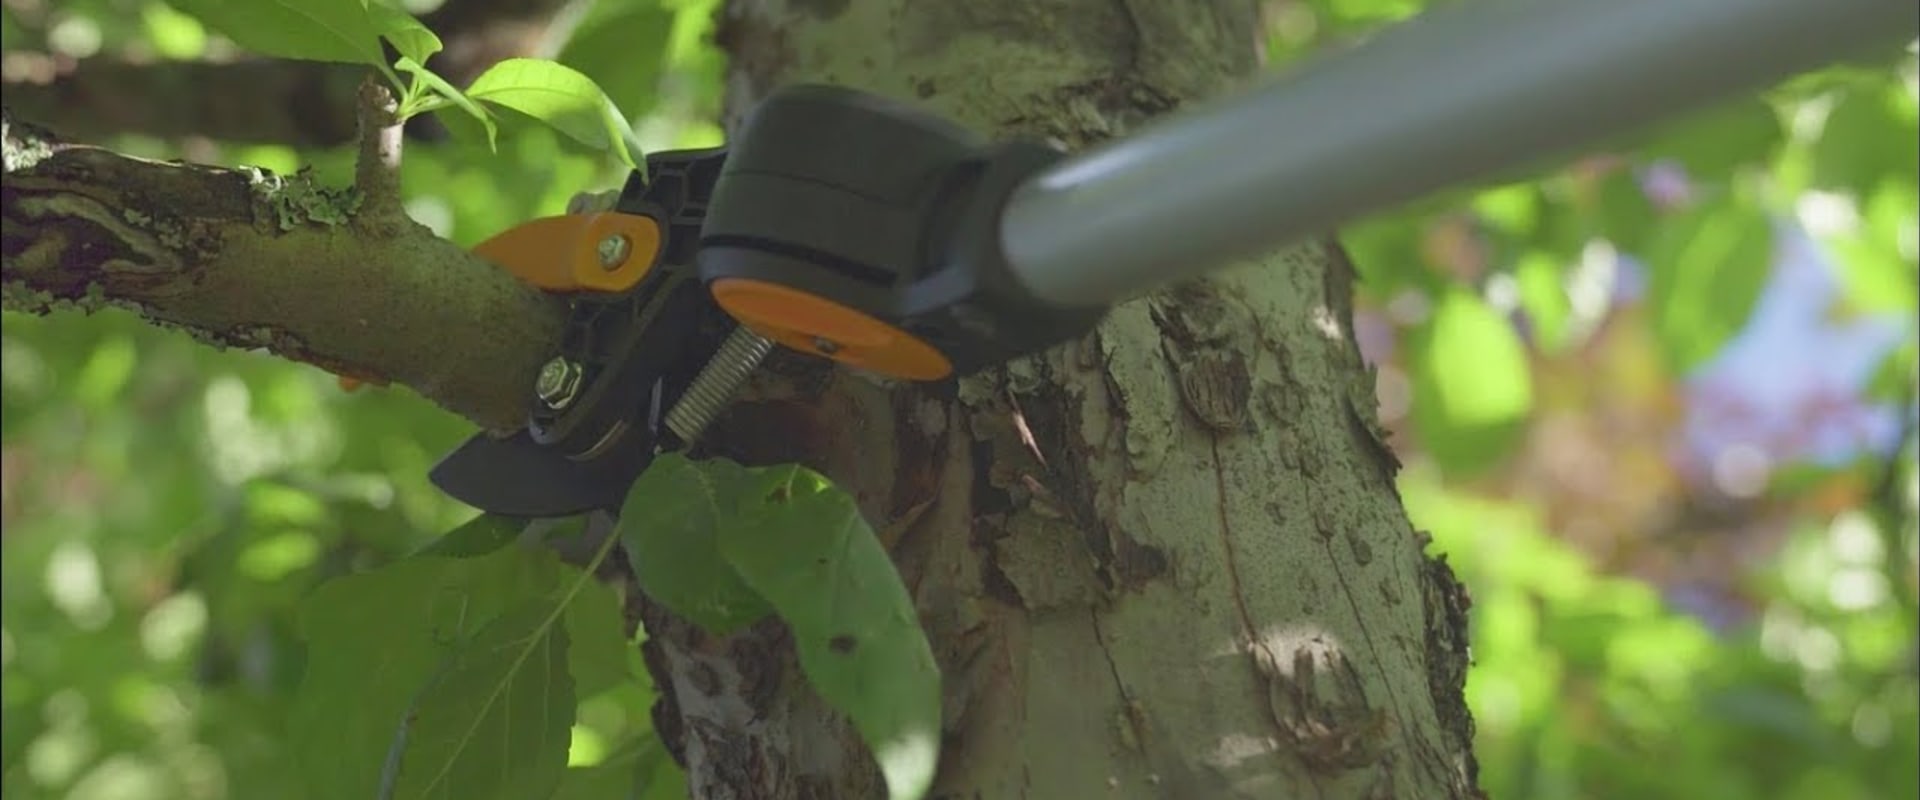 Tree Trimming with Lopping Shears and Saws